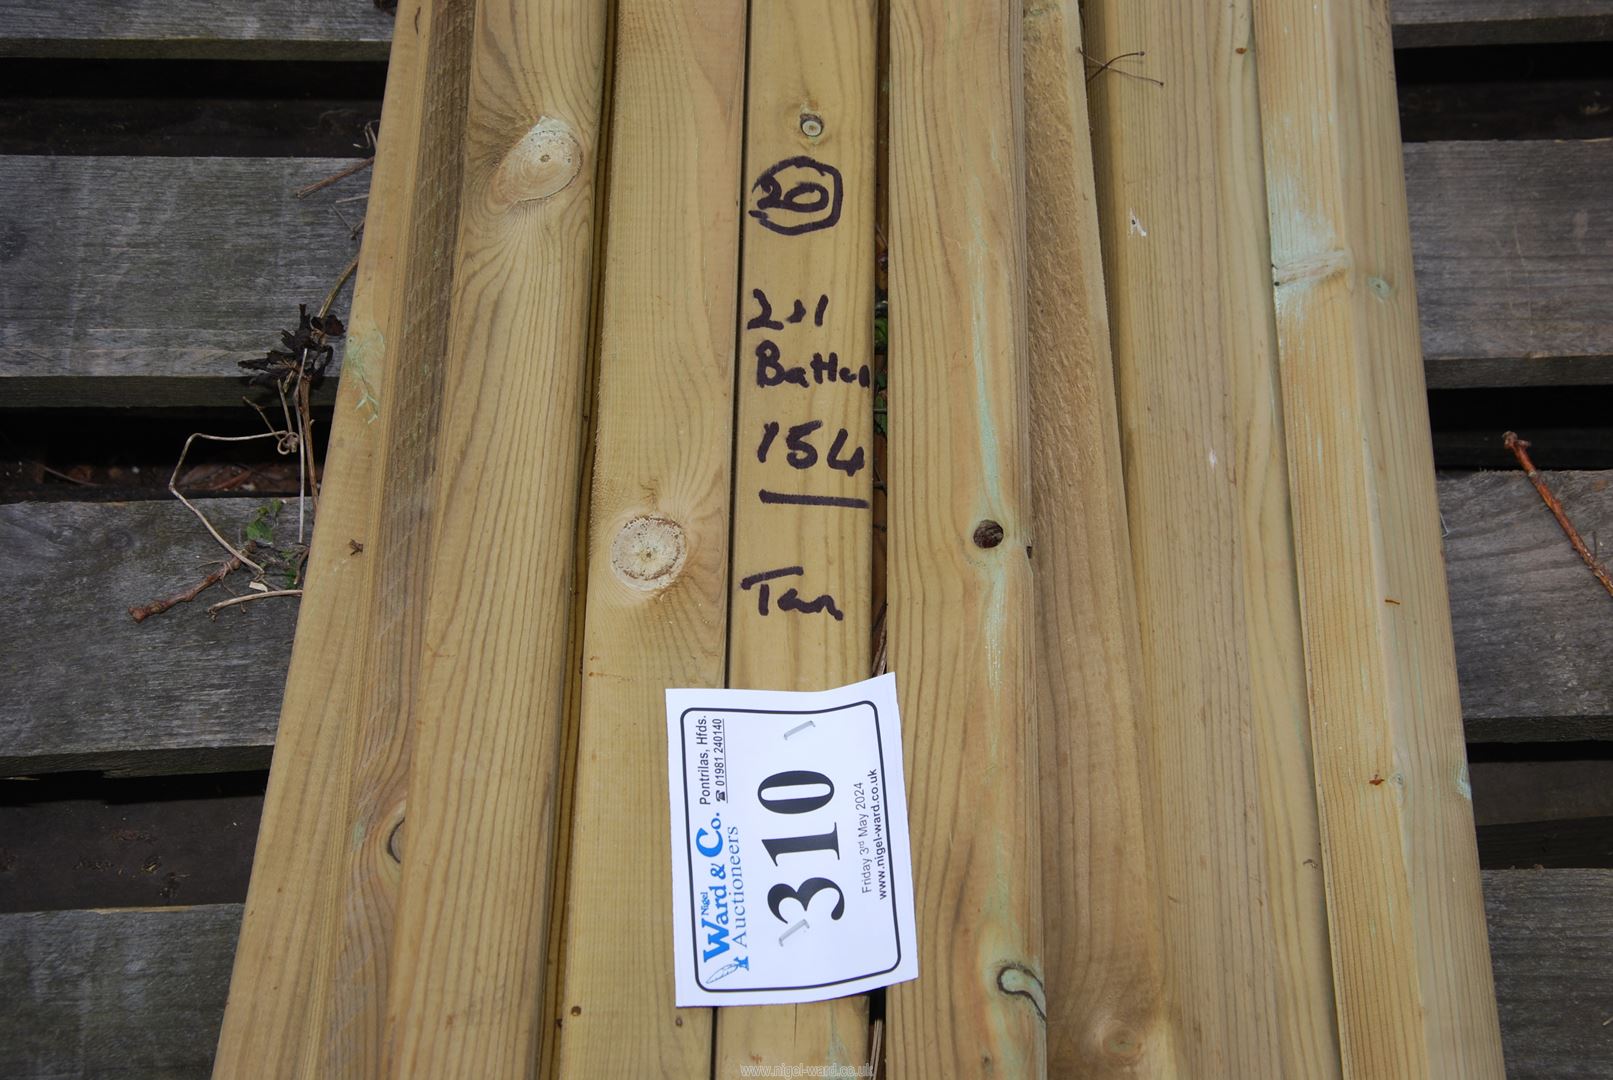 20 lengths of tanalised battens 2" x 1" x 154" long. - Image 2 of 2